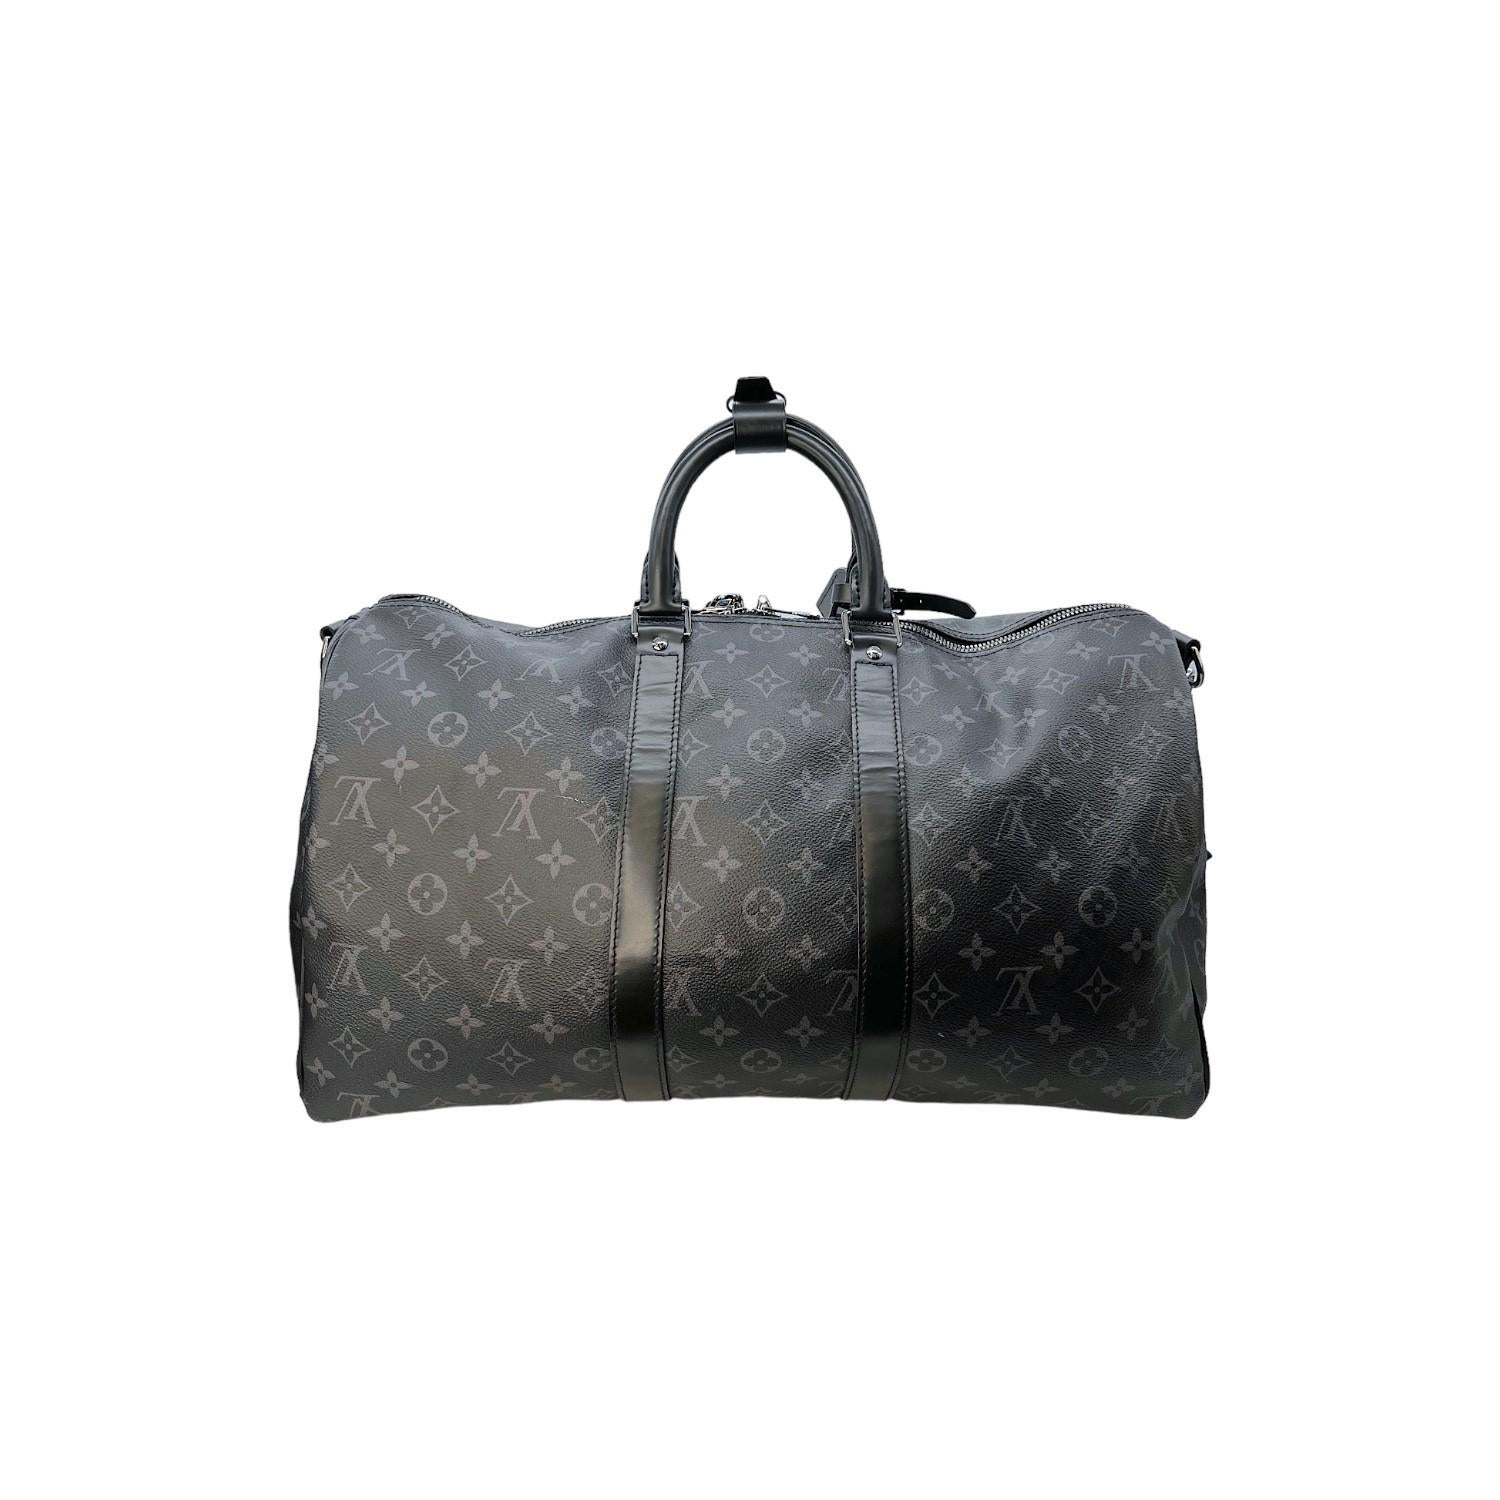 This Louis Vuitton Monogram Eclipse Keepall Bandoulière 45 was made in 2019 and it is finely crafted of the Louis Vuitton Monogram Eclipse canvas exterior with black leather trimming and silver-tone hardware features. It has a removeable and